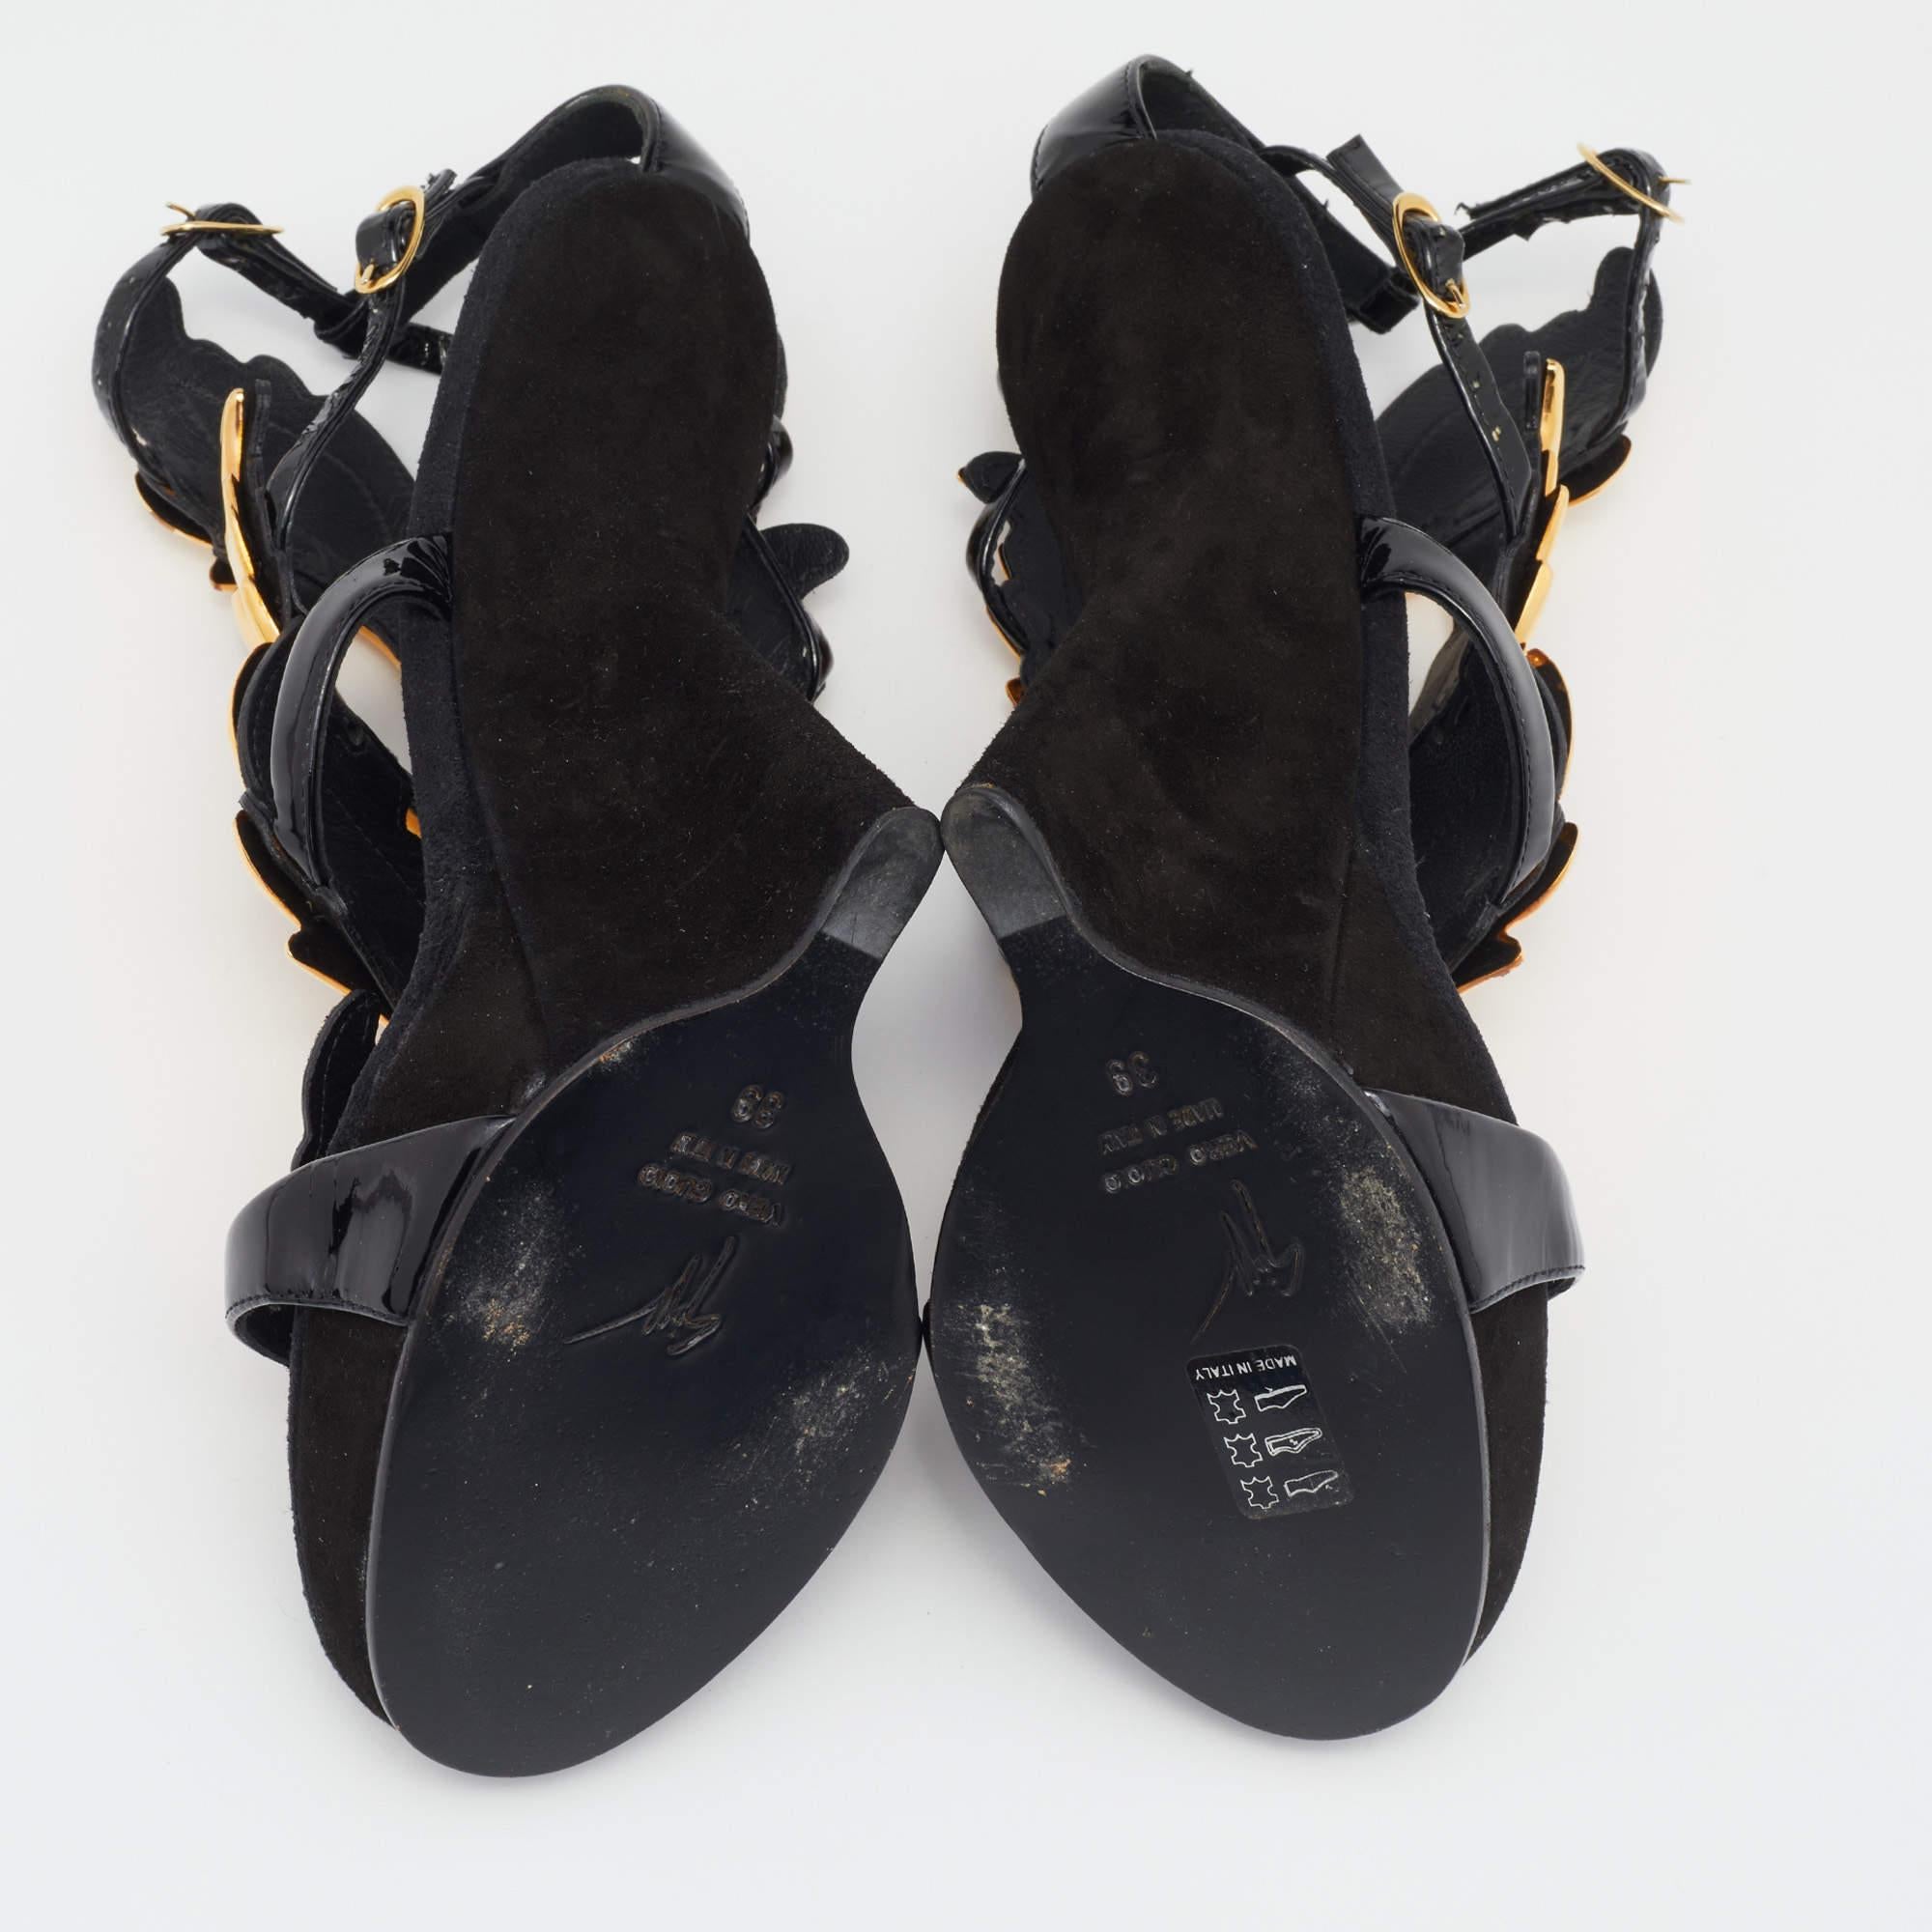 Giuseppe Zanotti Black/Gold Patent Leather and Suede Cruel Summer Sandals Size 3 5